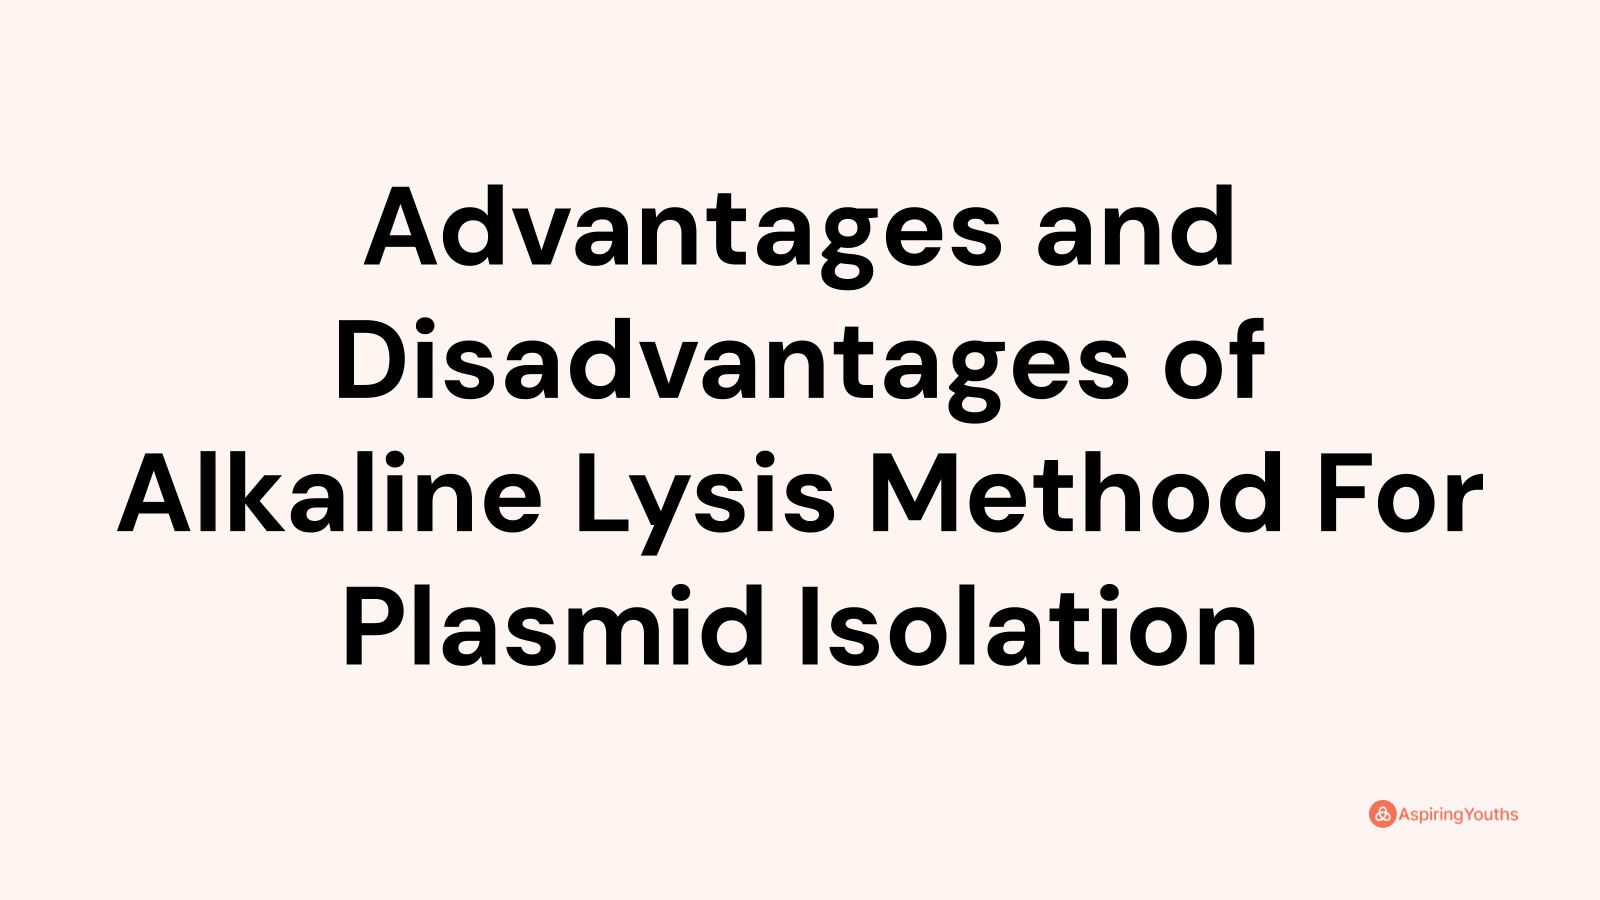 Advantages and disadvantages of Alkaline Lysis Method For Plasmid Isolation